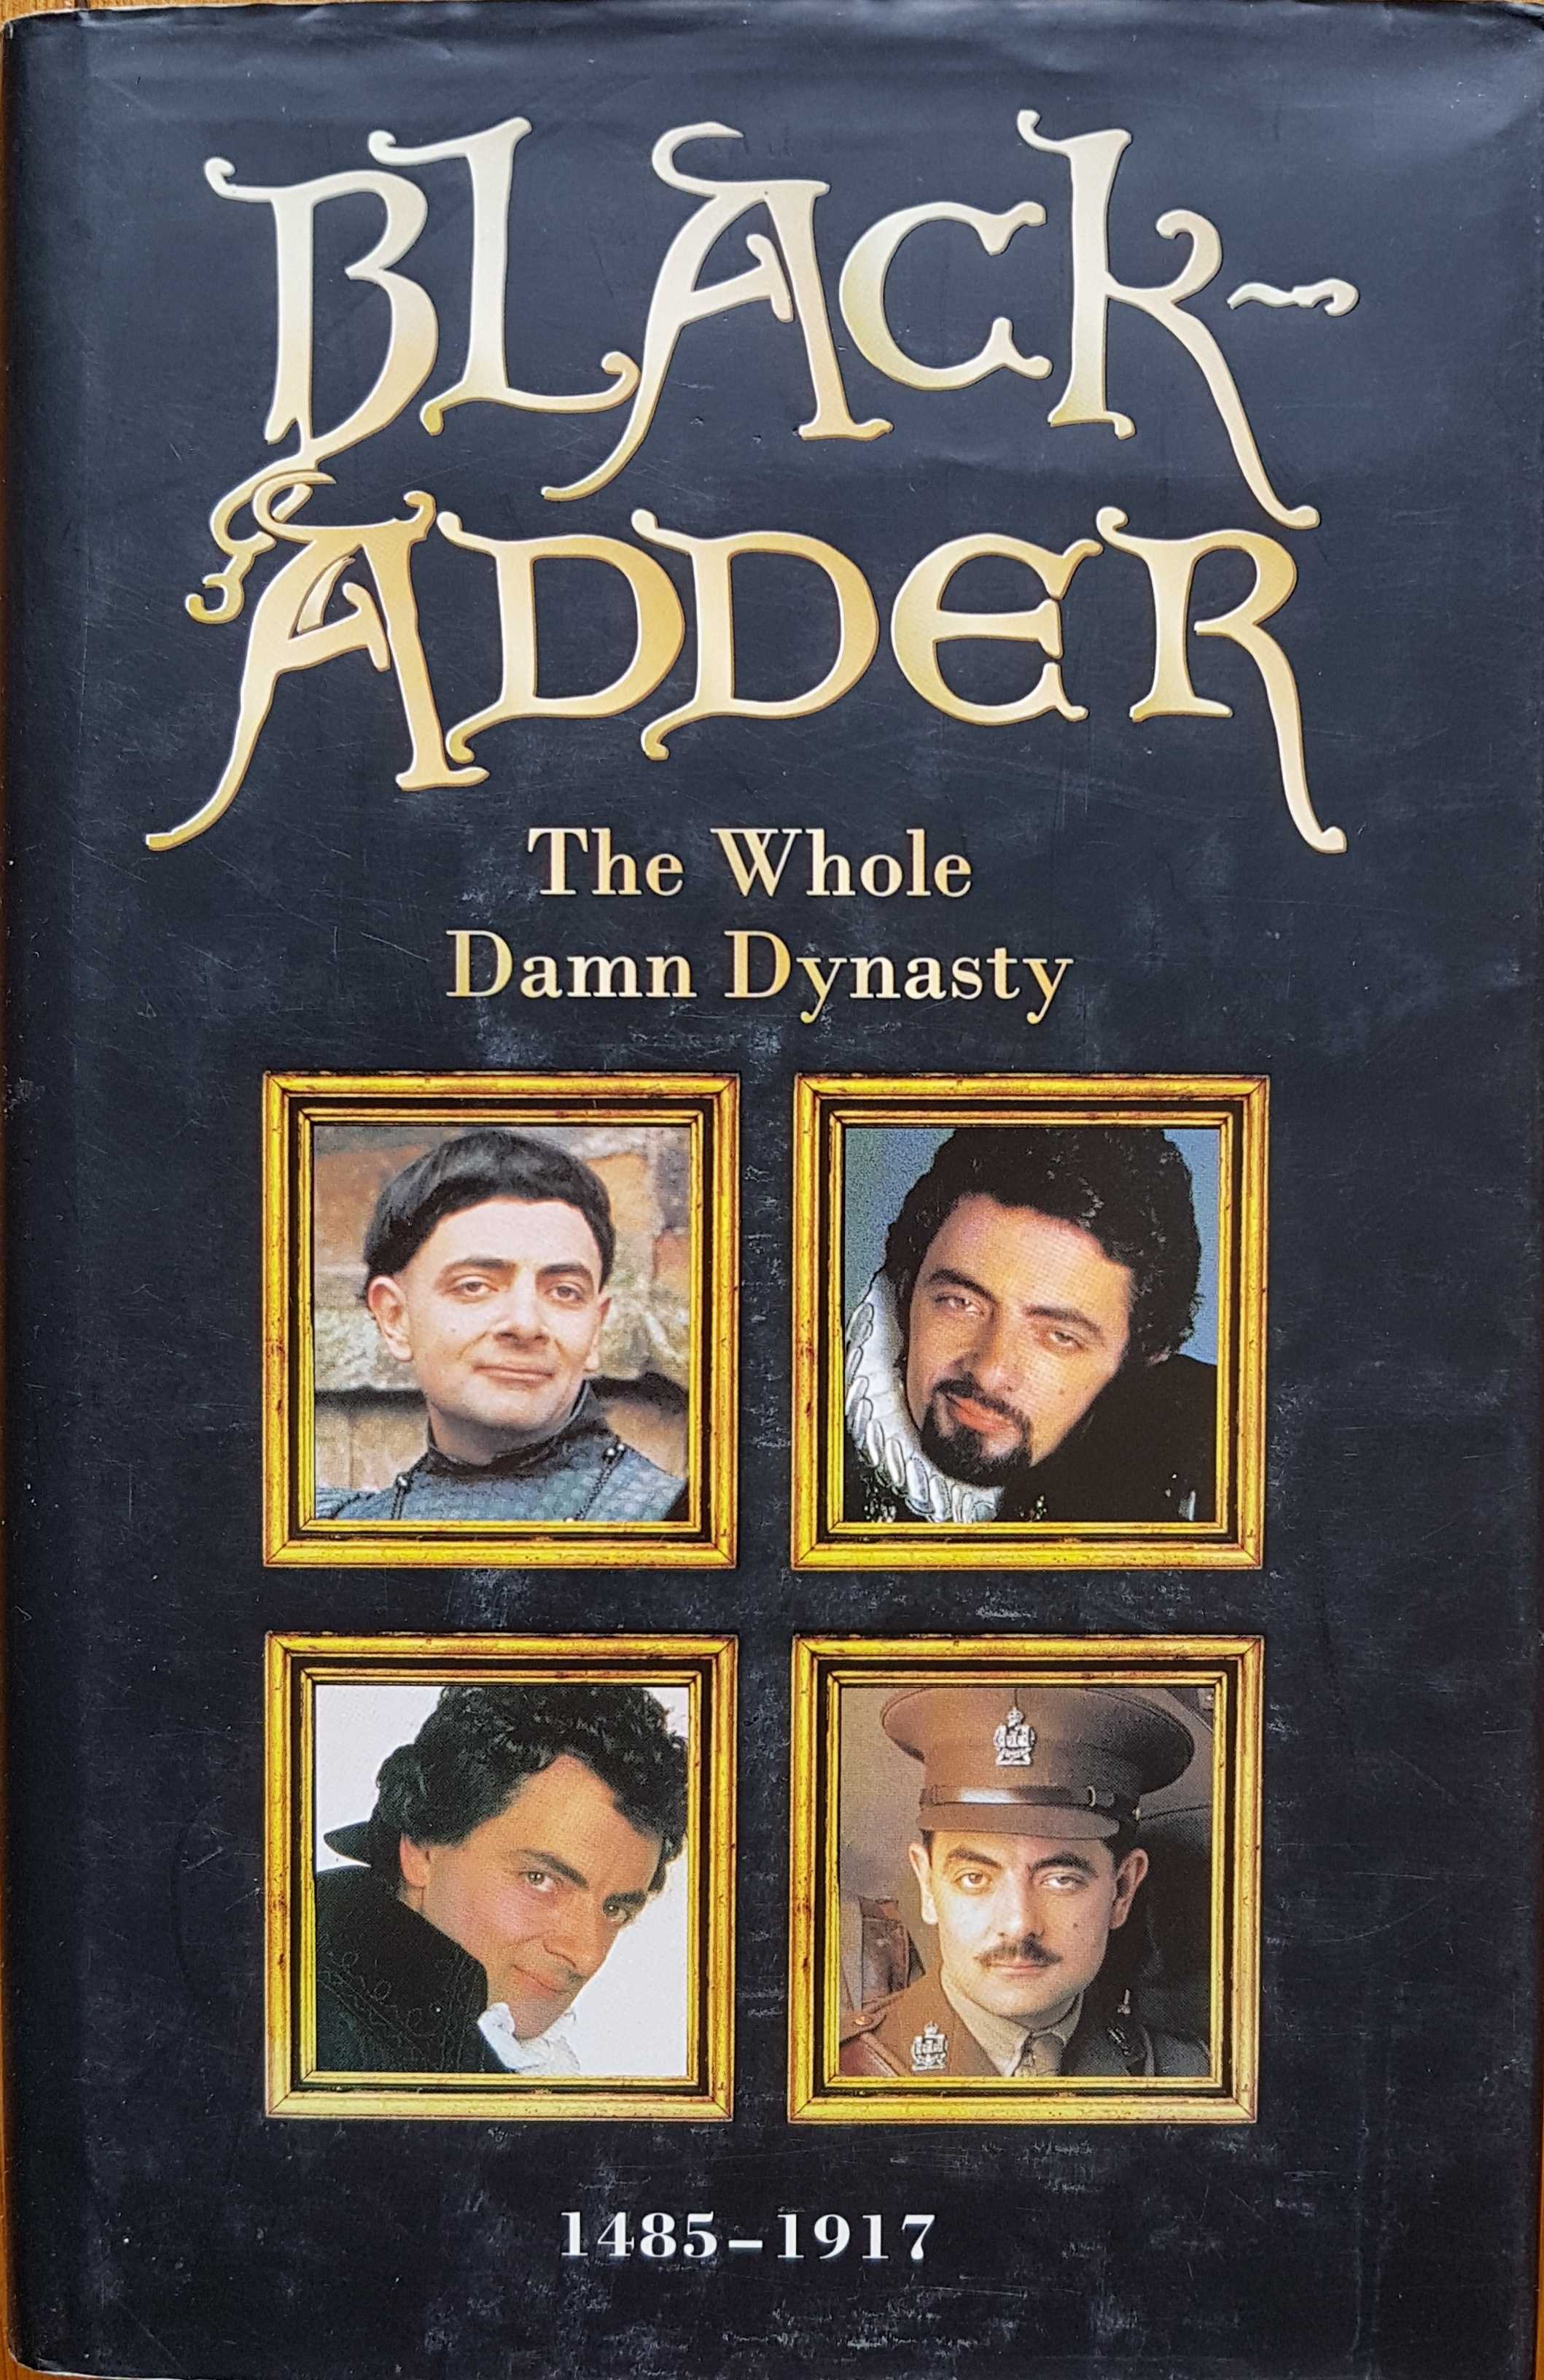 Picture of Black Adder - The whole damn dynasty by artist Ben Elton / John Lloyd / Richard Curtis / Rowan Atkinson from the BBC books - Records and Tapes library